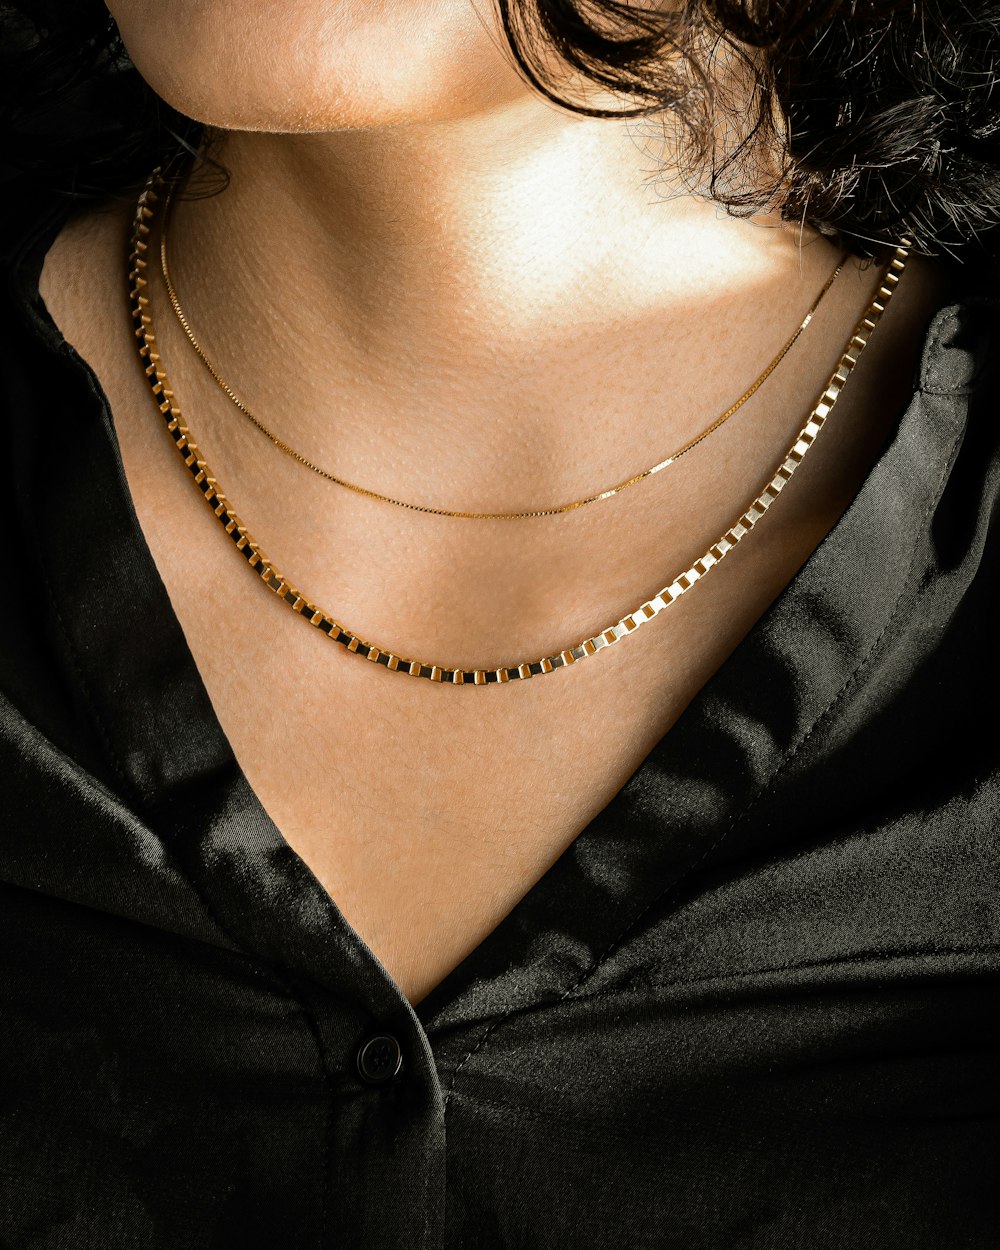 person wearing silver chain necklace